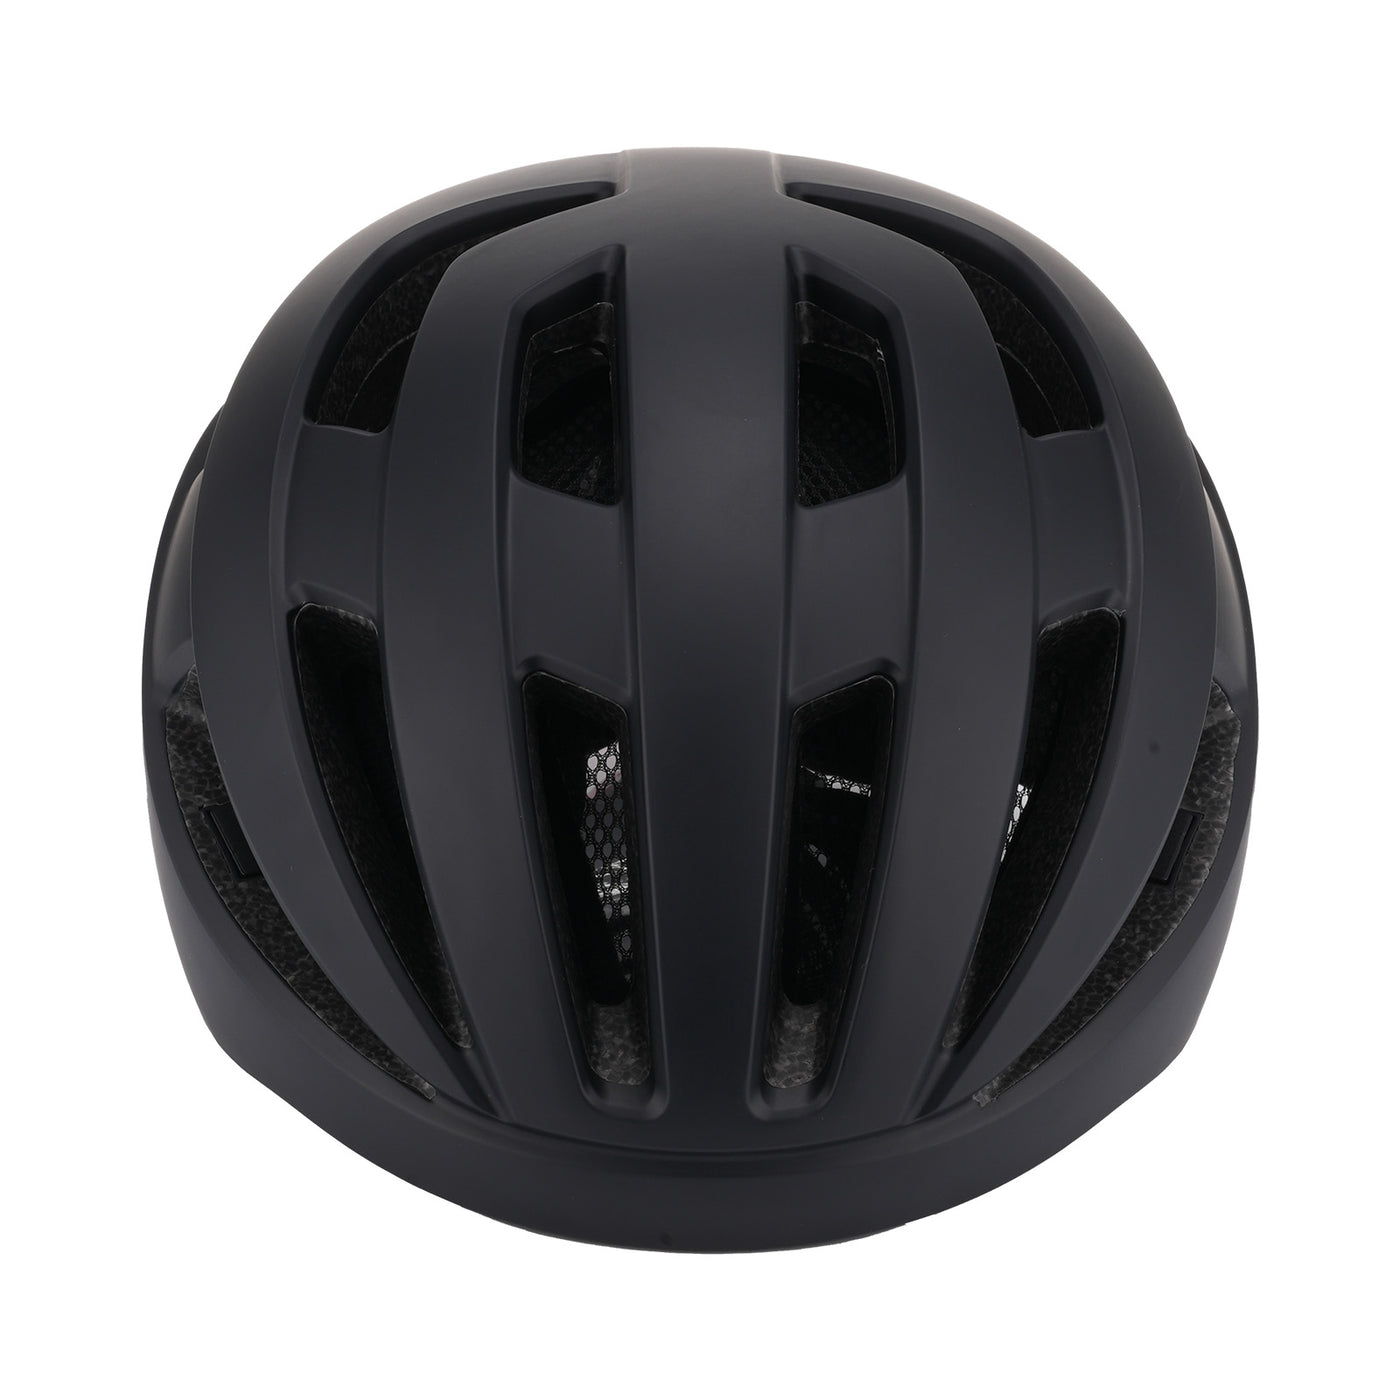 isinwheel Cycling Helmet with Rechargeable Light